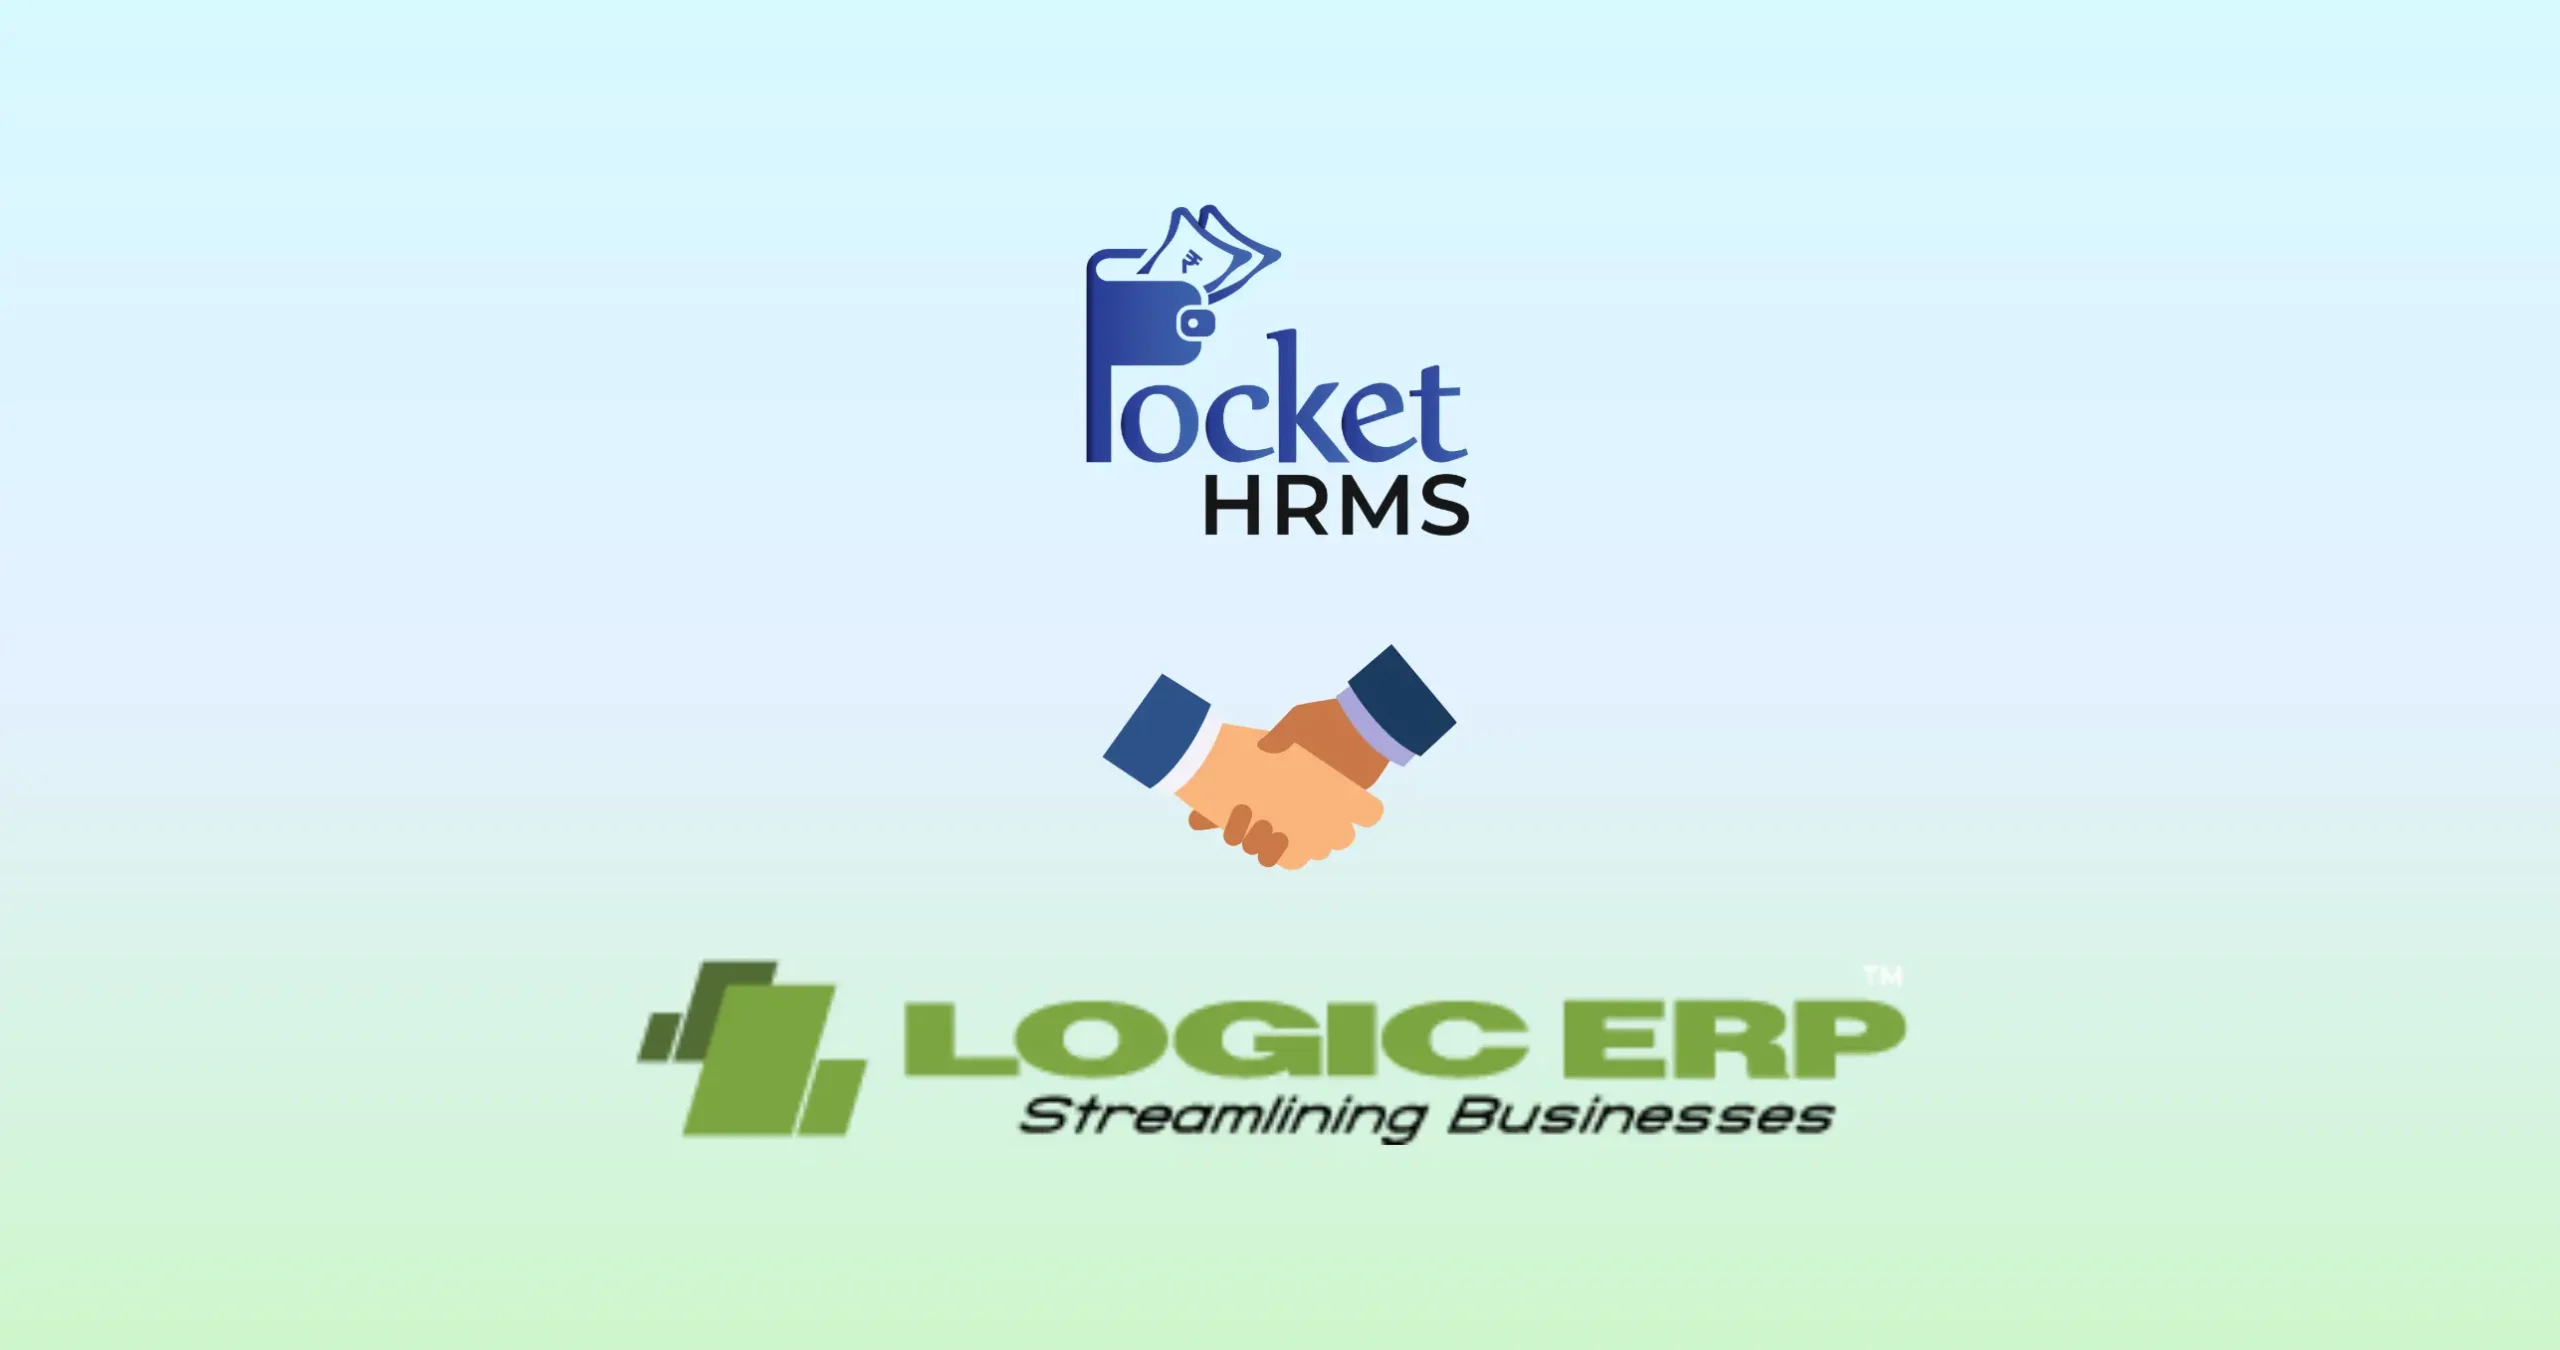 PocketHRMS announces integration with Logic ERP